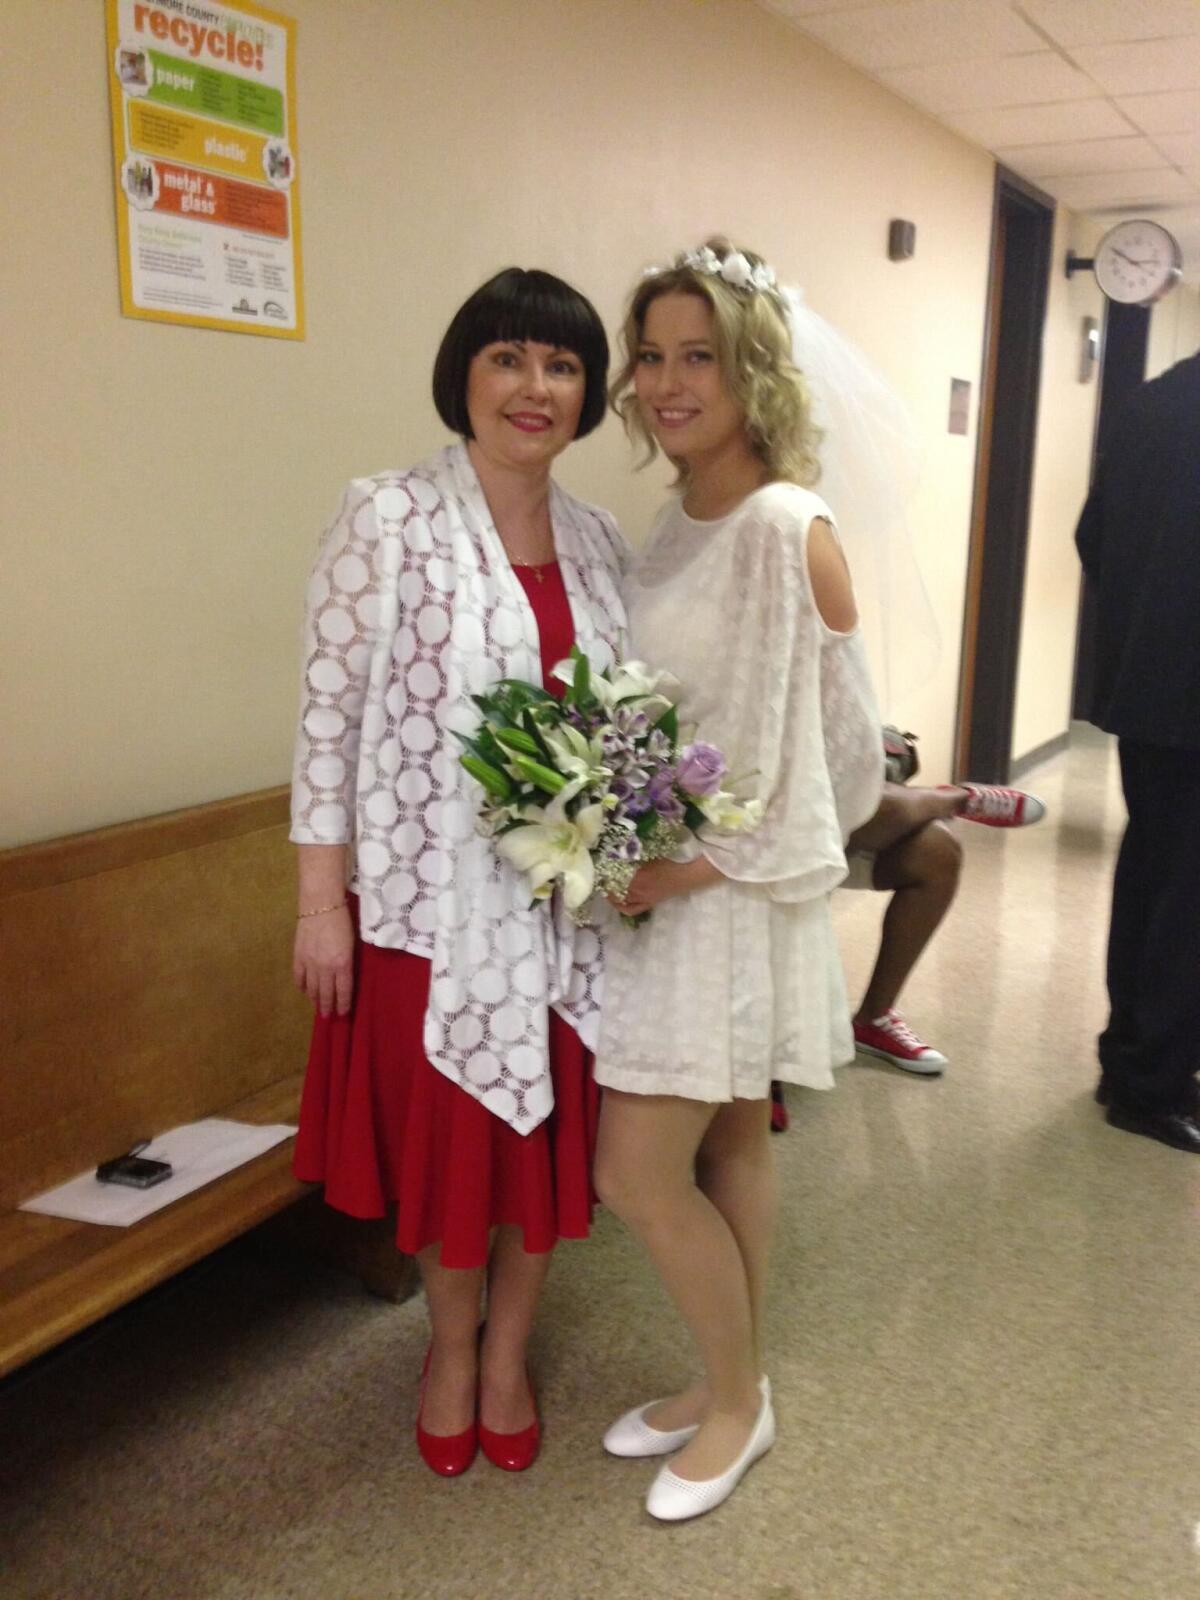 Two women, one holding a bouquet of flowers, pose for a photo in a hallway